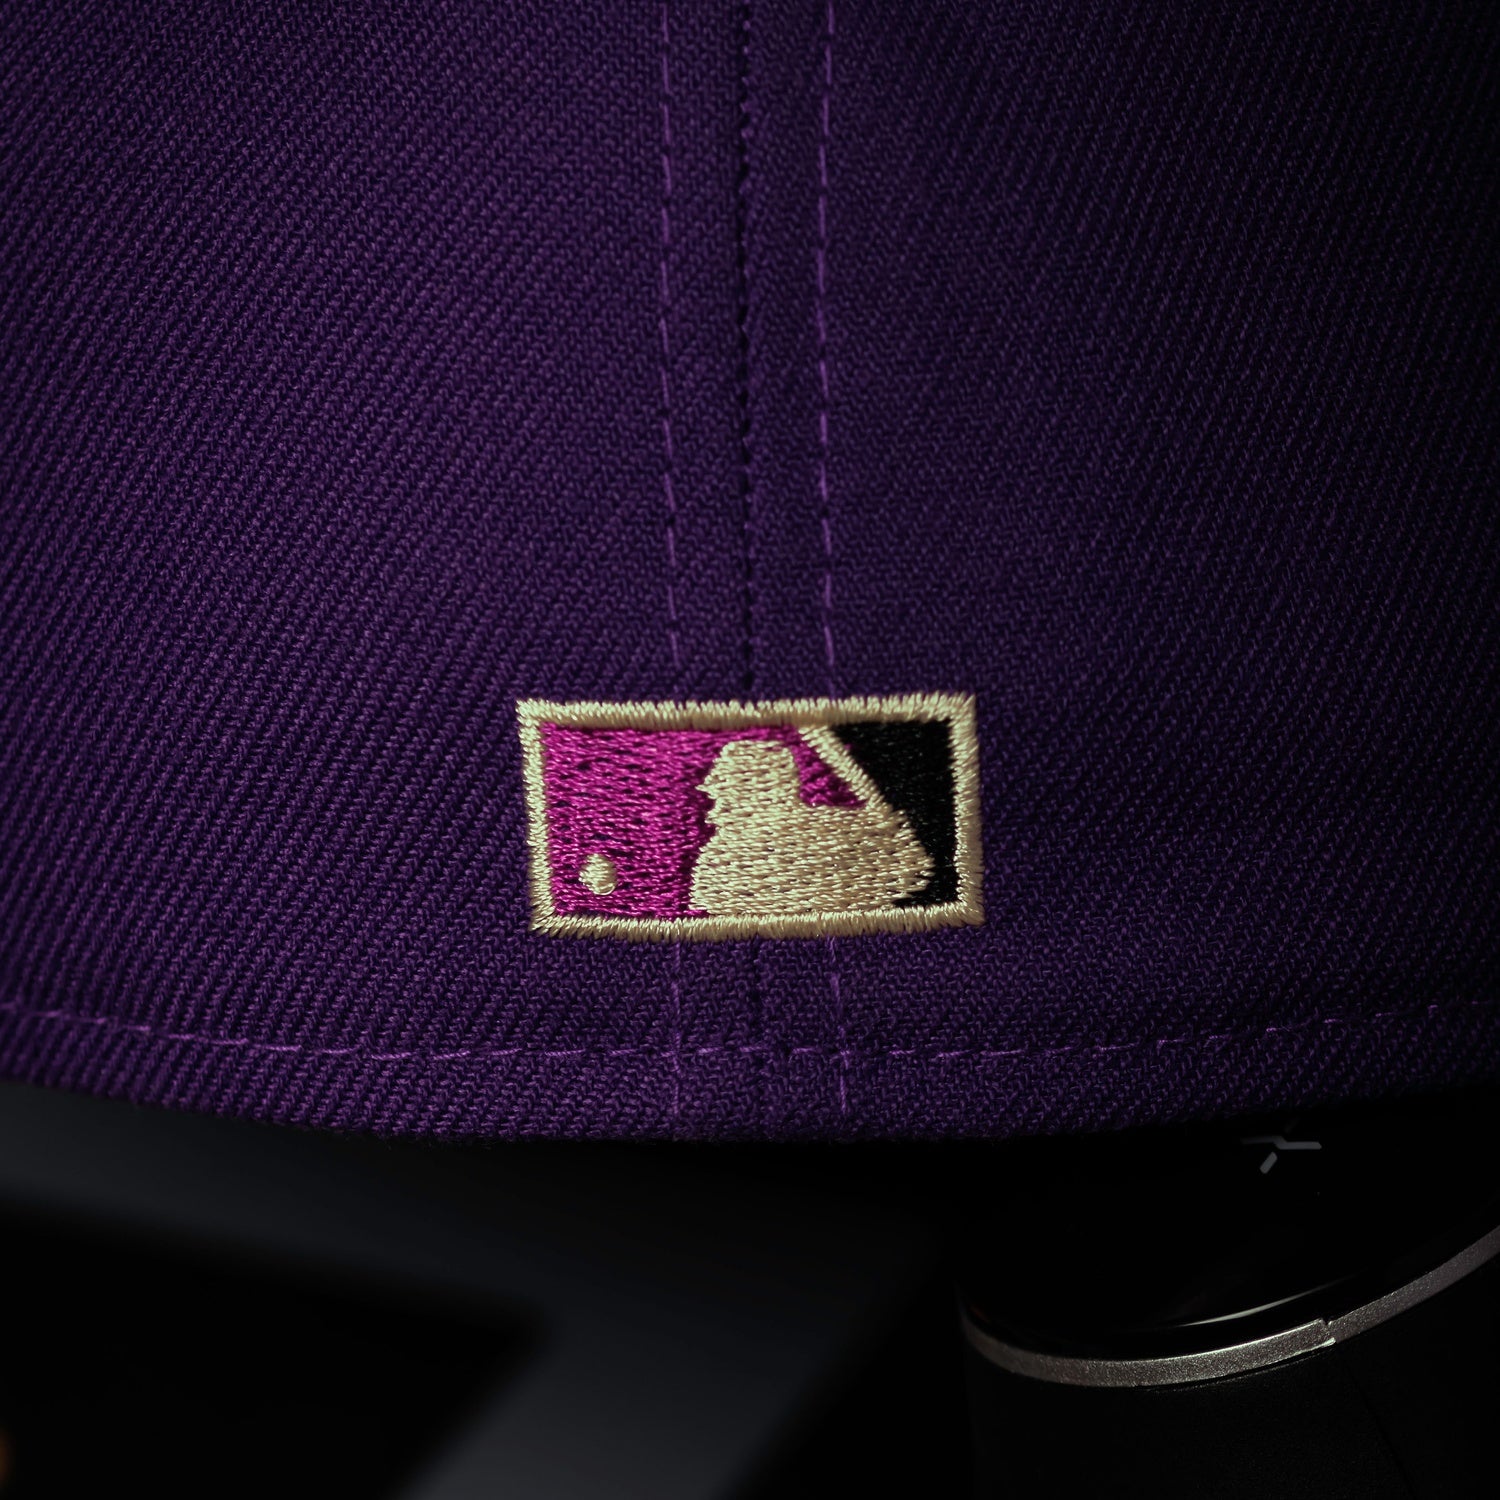 MLB Purple Refresh 59Fifty Fitted Hat Collection by MLB x New Era